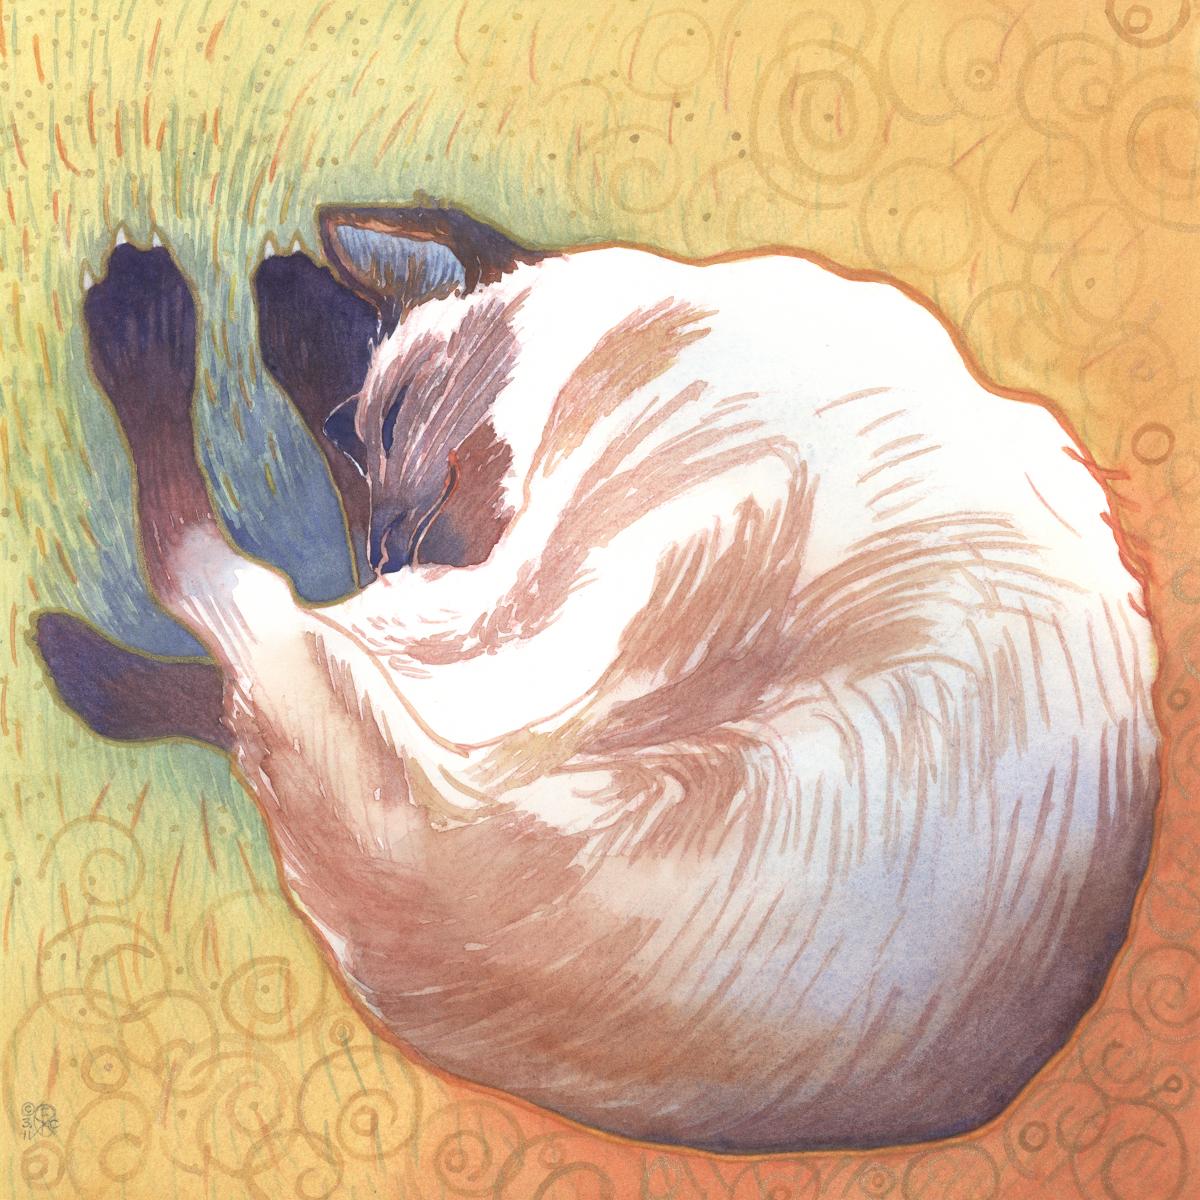 If a Cat Dreamt - watercolor painting of a cat by Frank Costantino